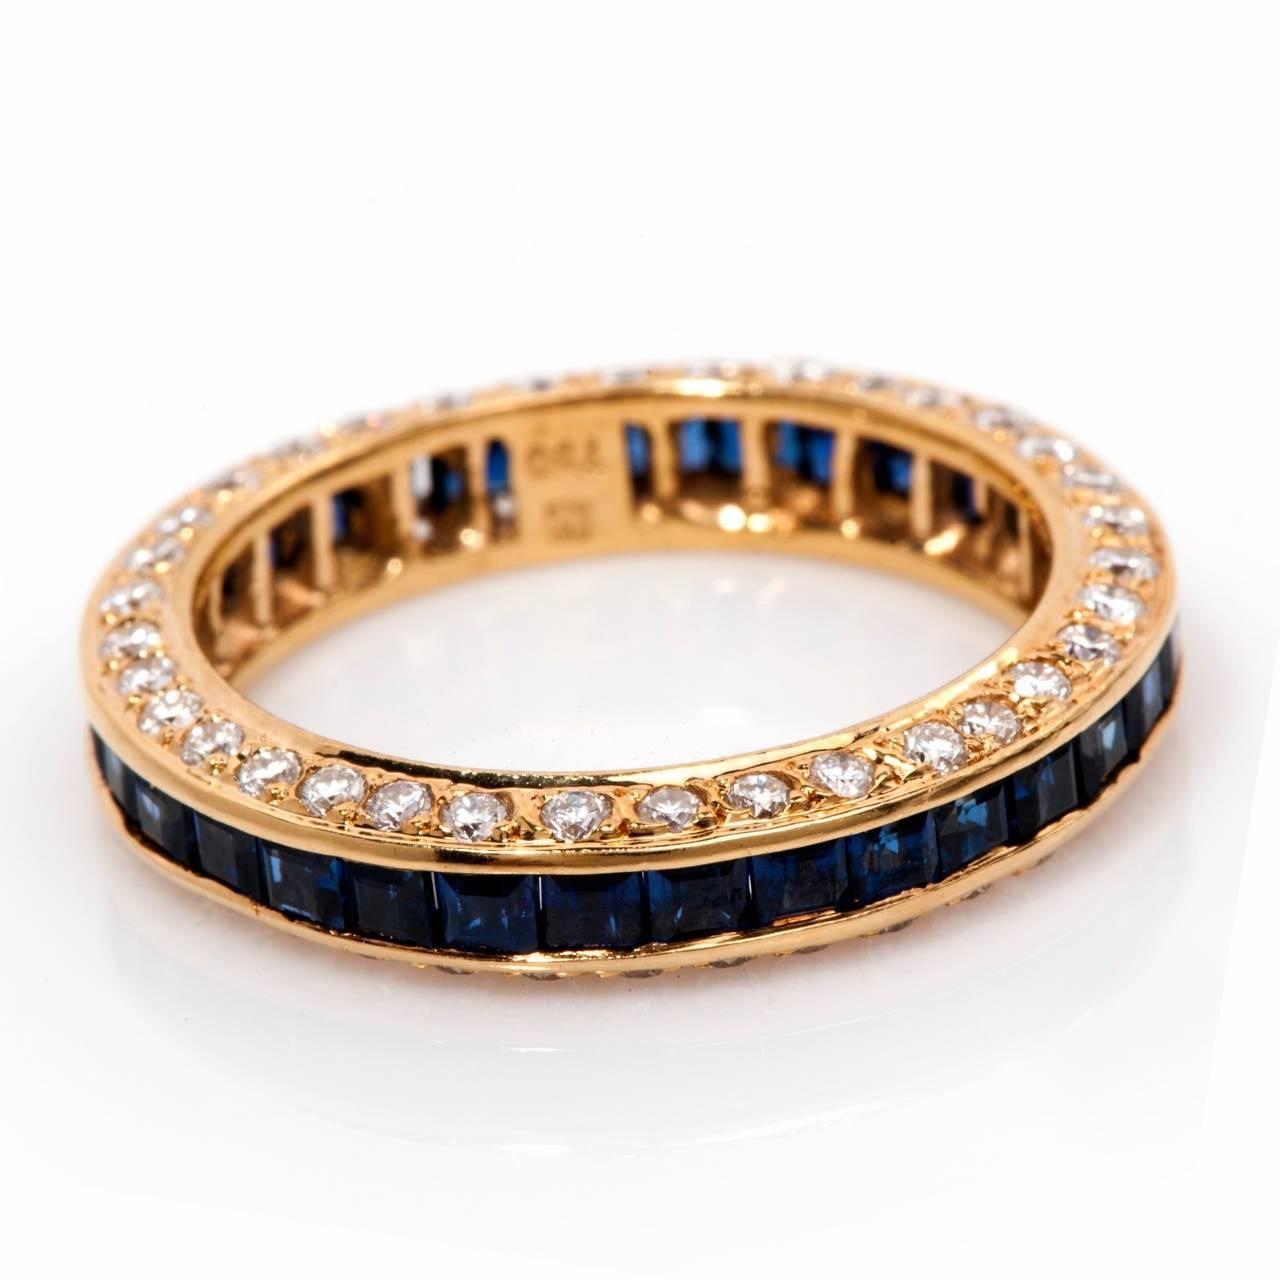 This Vinatge 1970's eternity band ring is full of glamour and sparkle with a touch of romance. Finely crafted in solid 18K yellow gold, this eternity band is accented with 70 genuine round cut diamonds approx. 1.30carat, G-H color, VS clarity, and